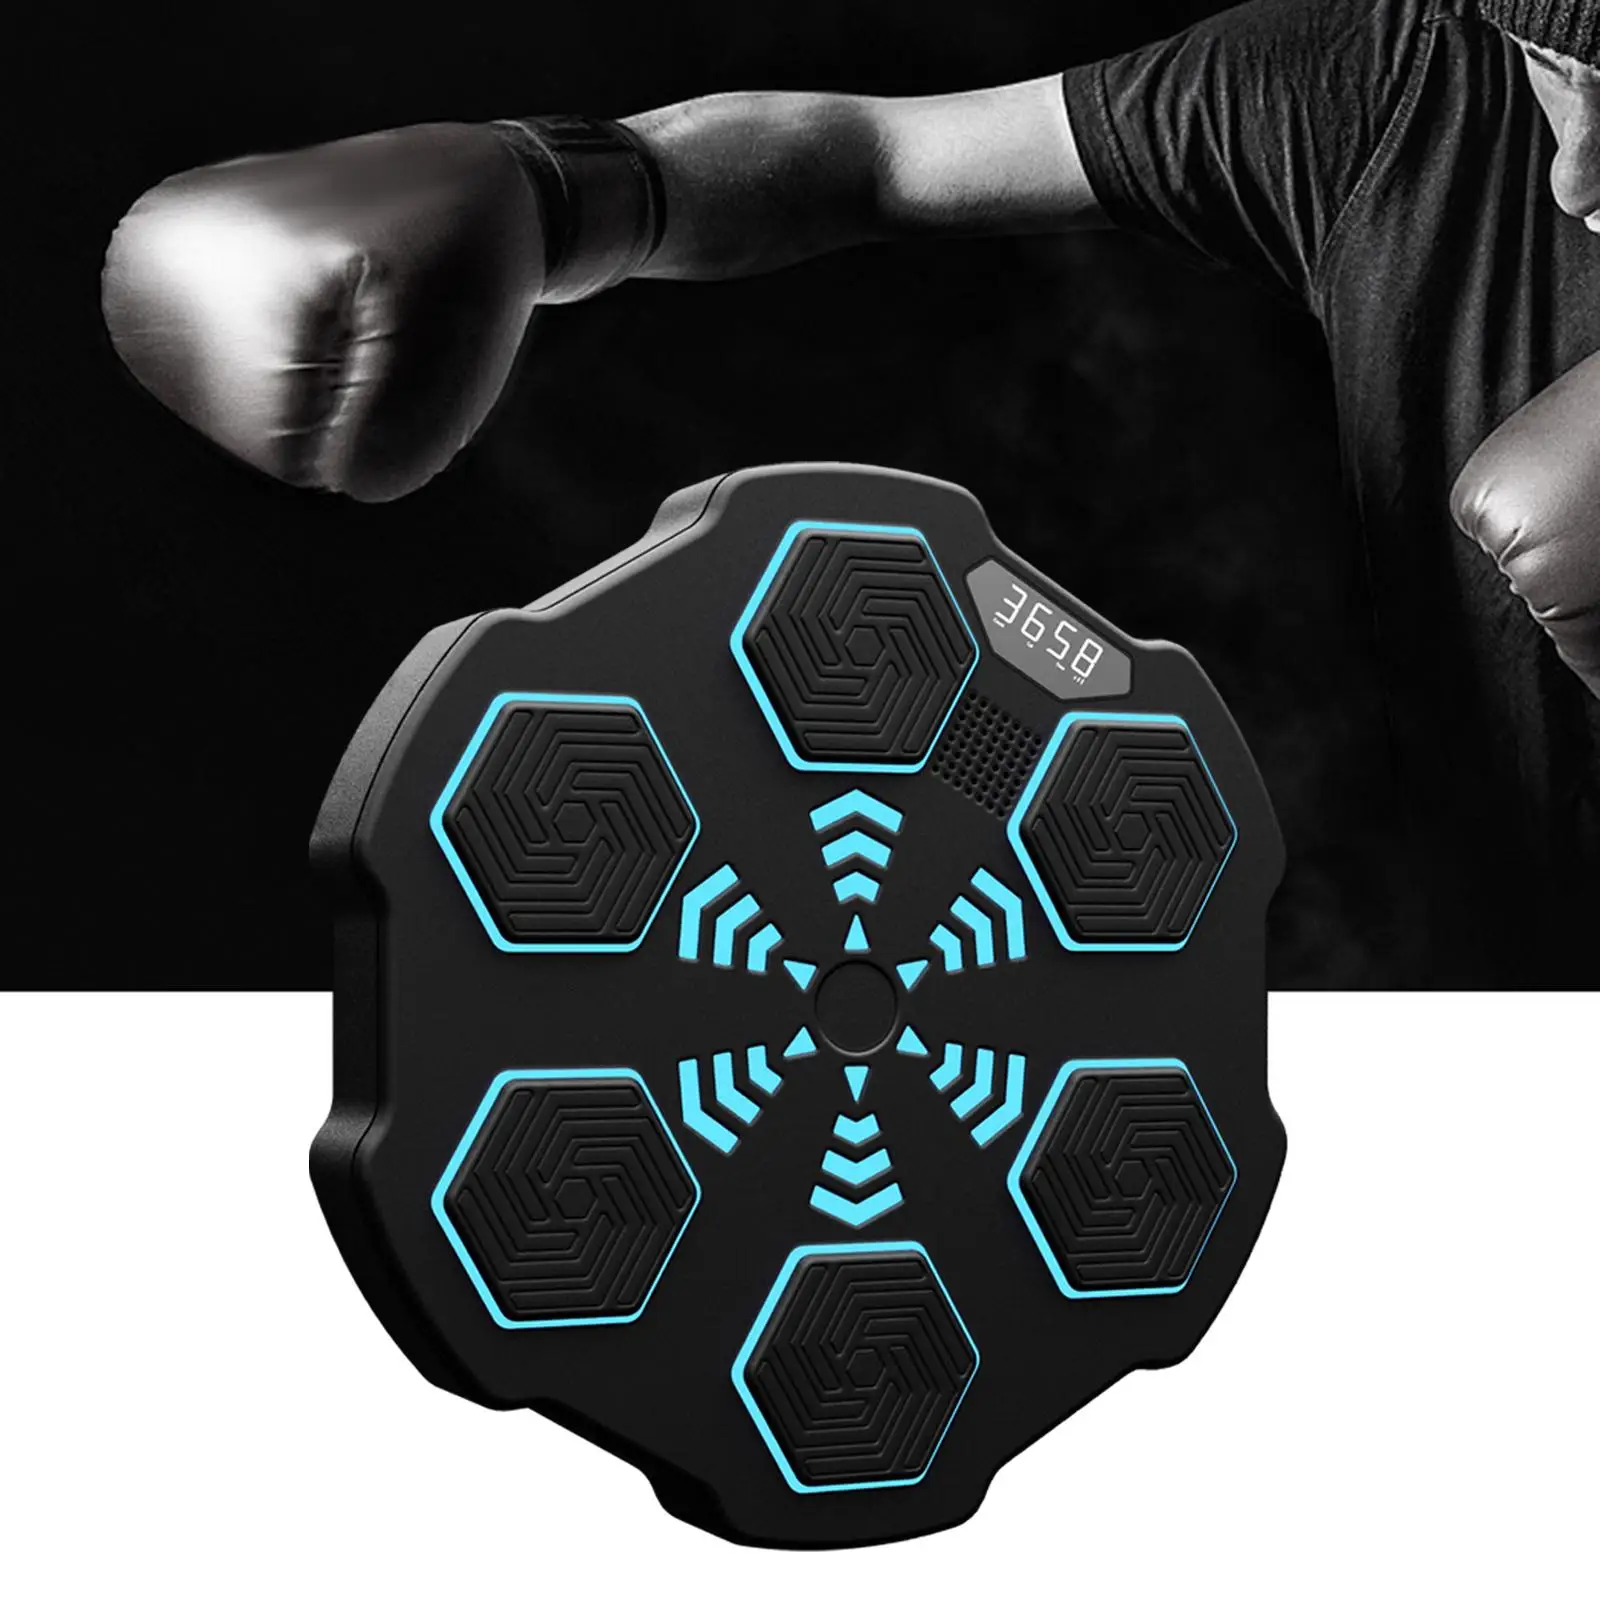 Music Boxing Training Machine Electronic Wall Target for Strength Training